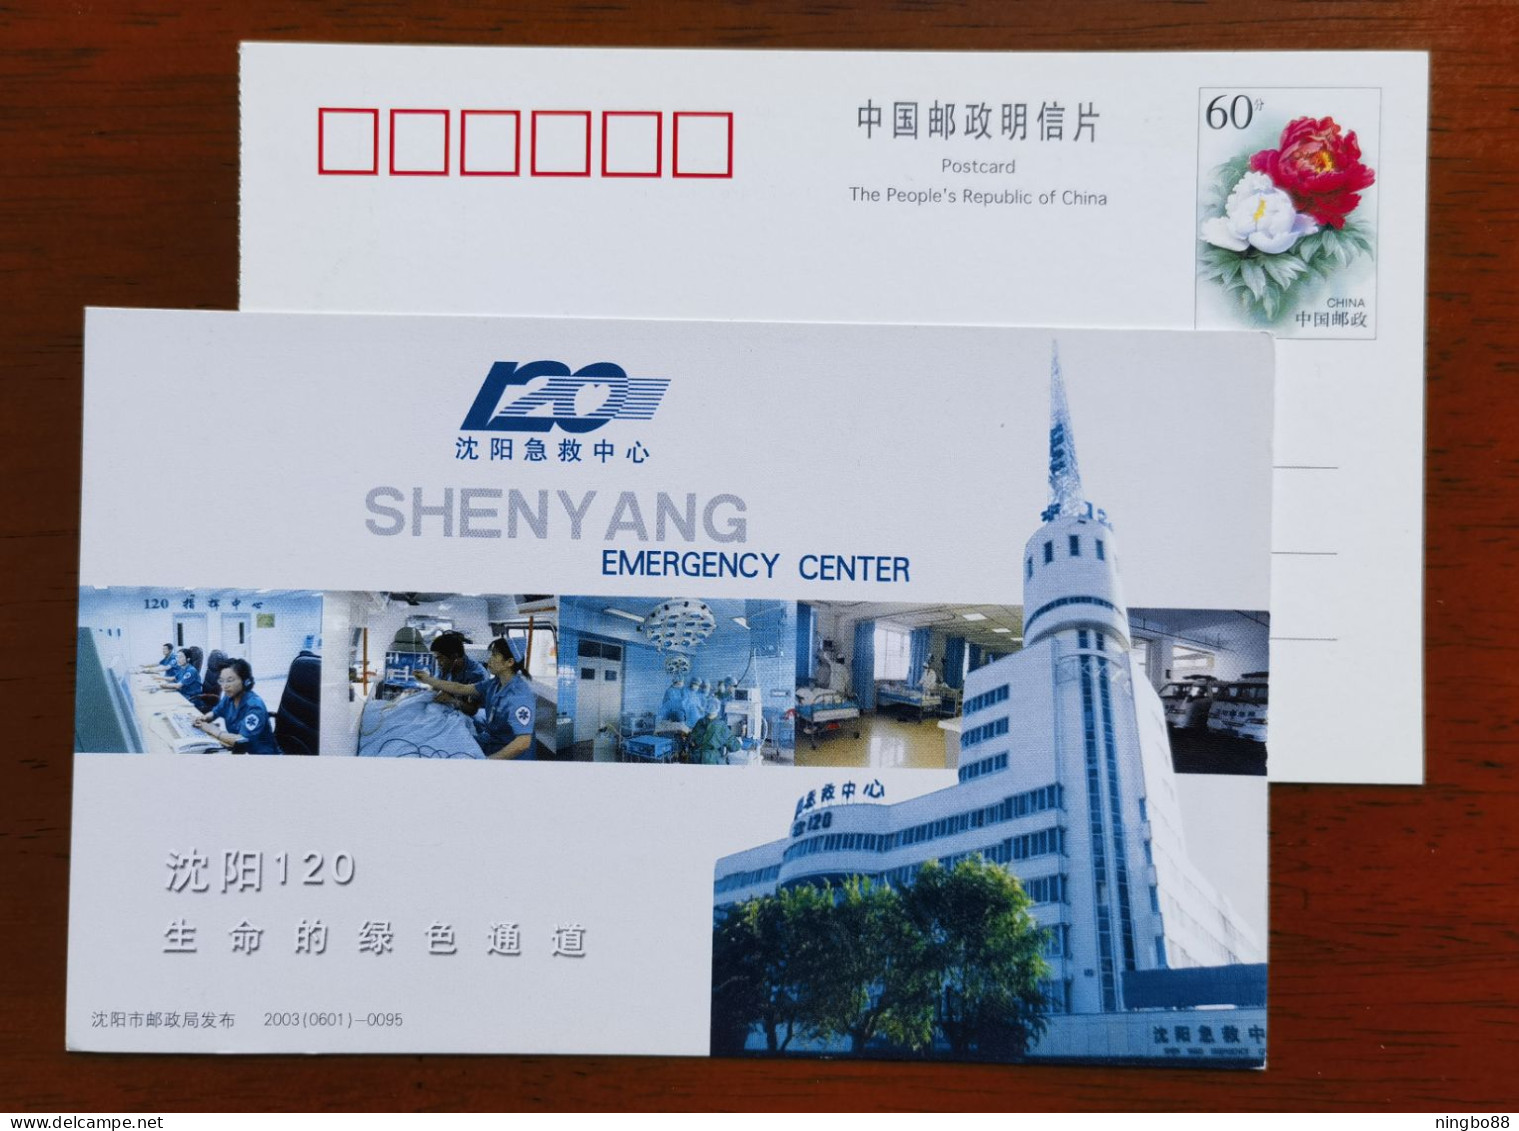 120 The Green Channel Of Life,Command Center,ambulance,China 2003 Shenyang Emergency Center Advertising Pre-stamped Card - First Aid